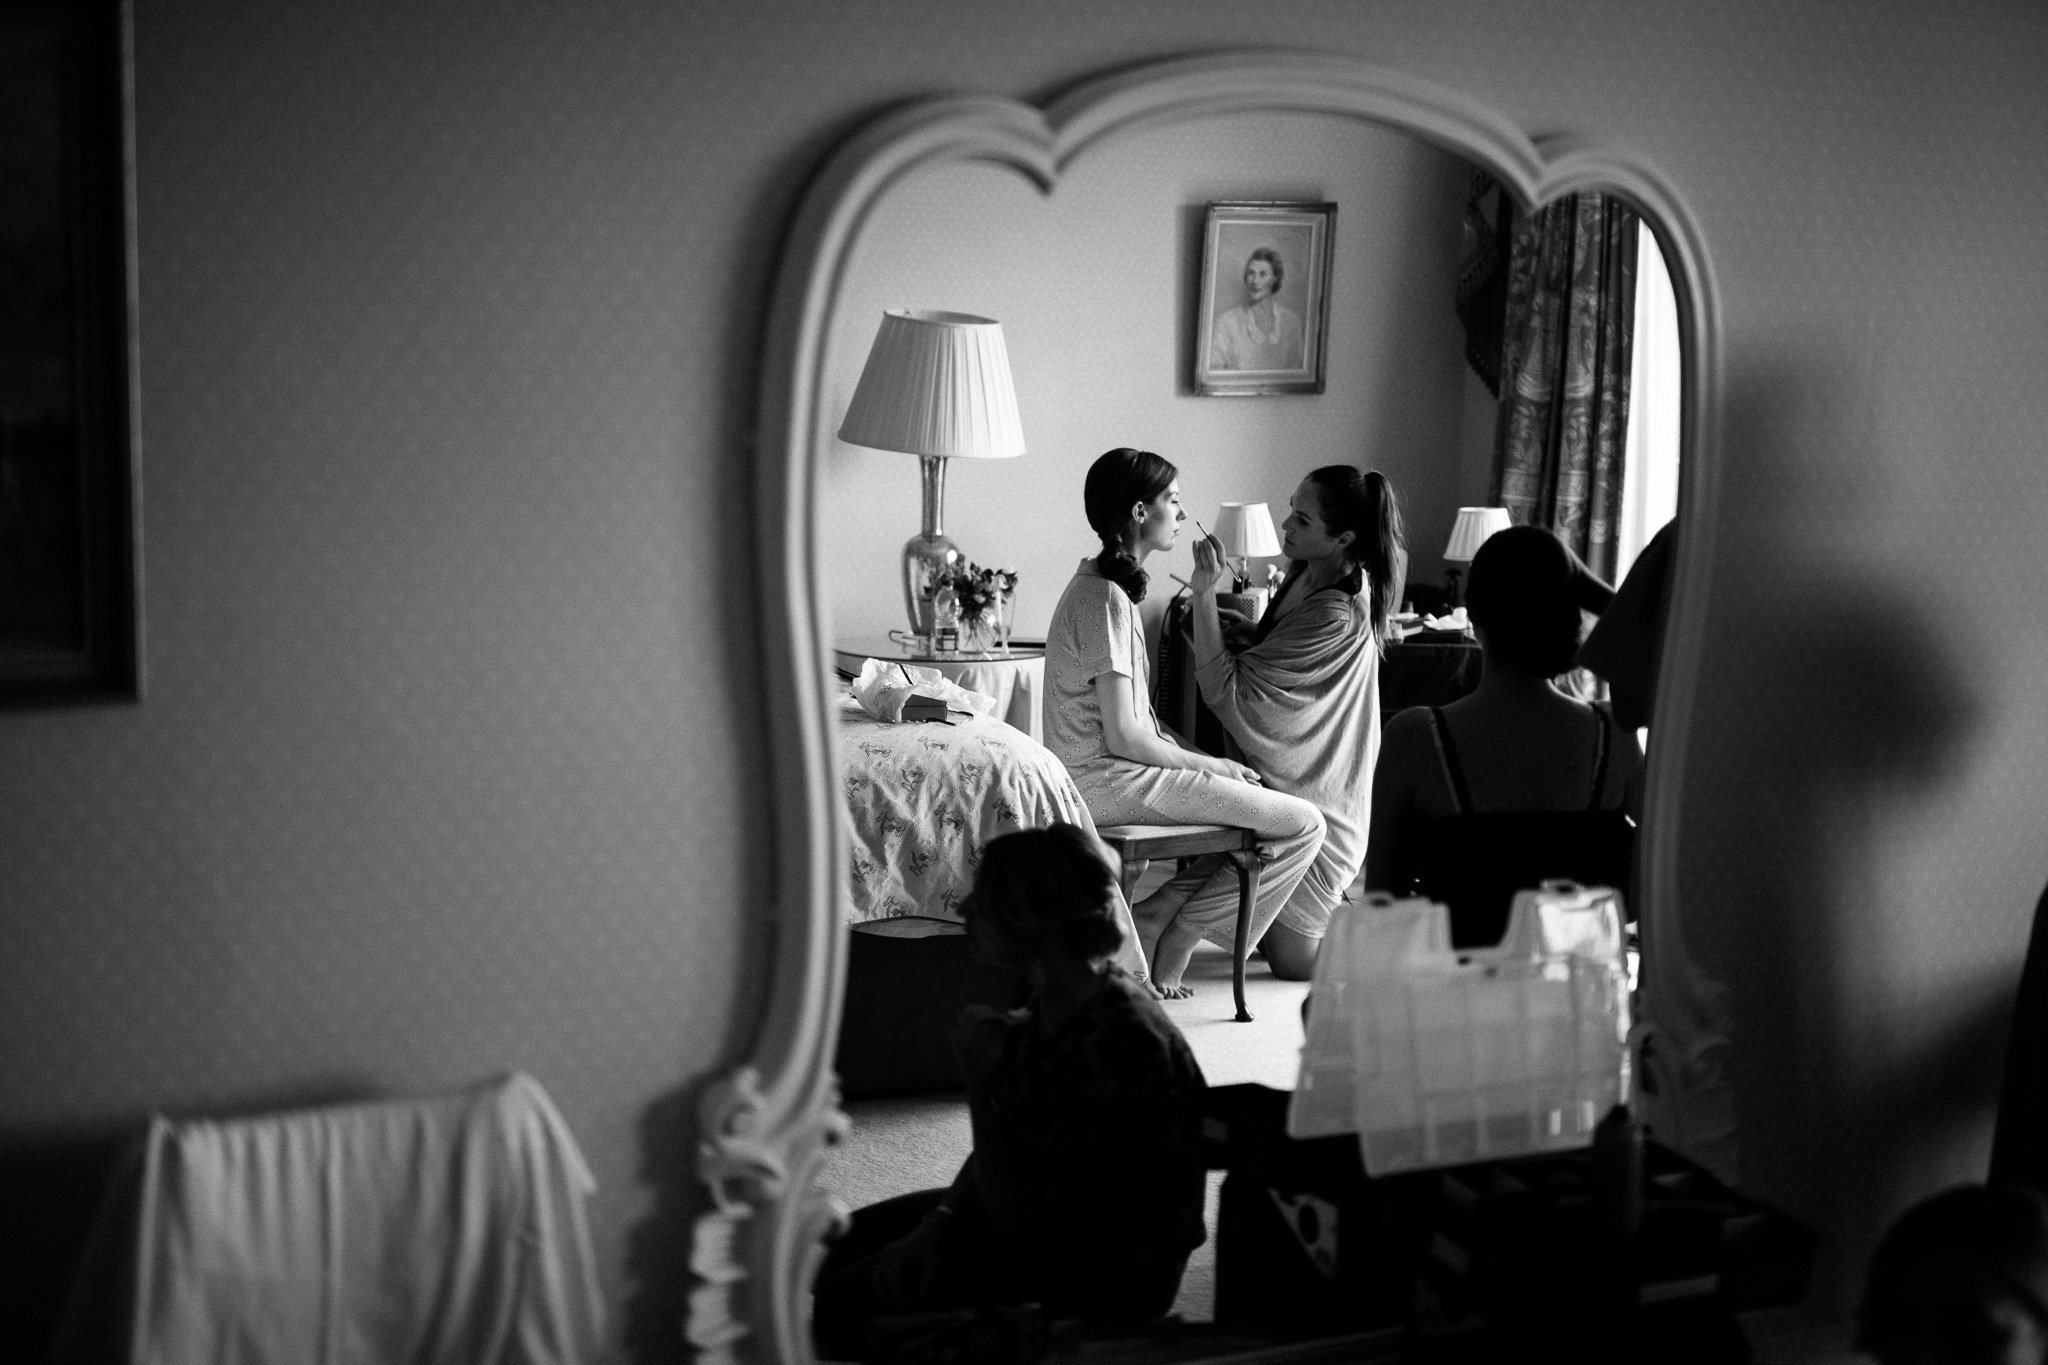  Reflection in large mirror of bride on her wedding day at Wadhurst castle wedding venue 